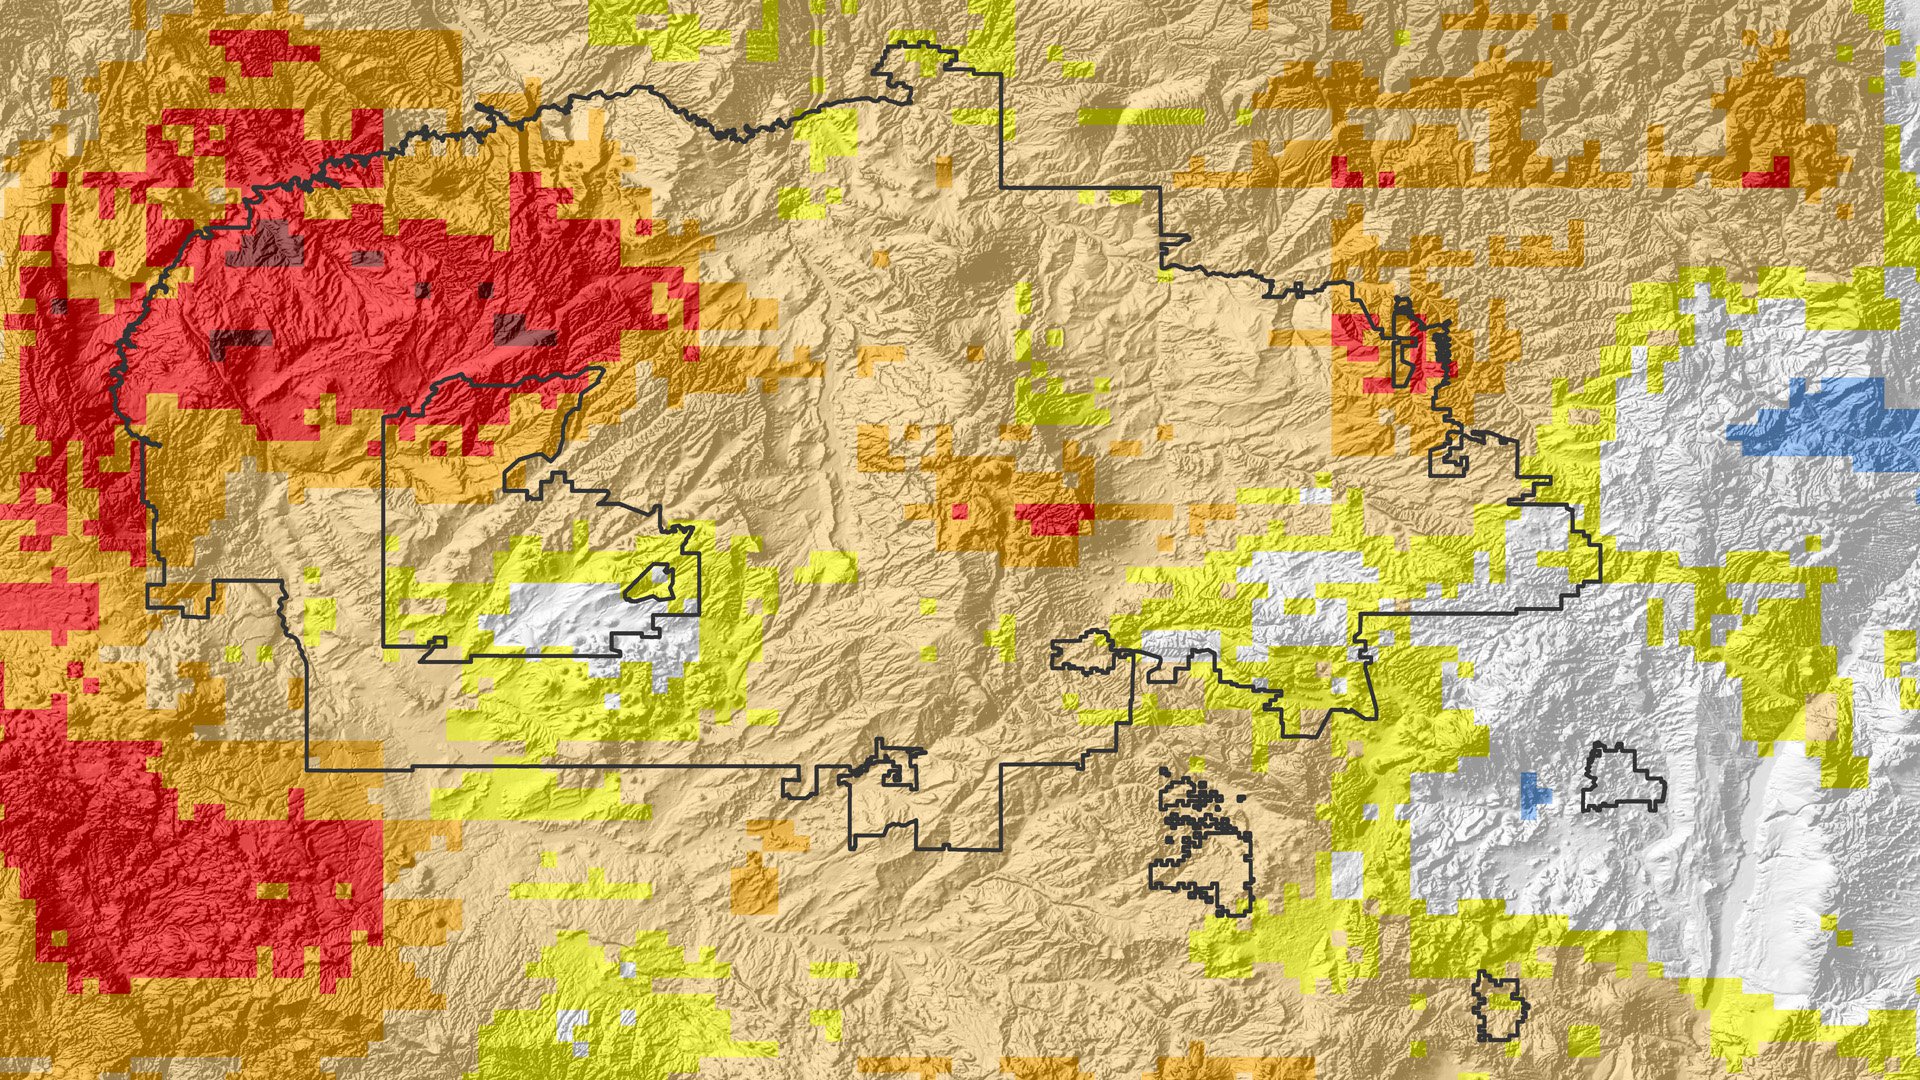 A drought severity map over the study area from the DEVELOP team.